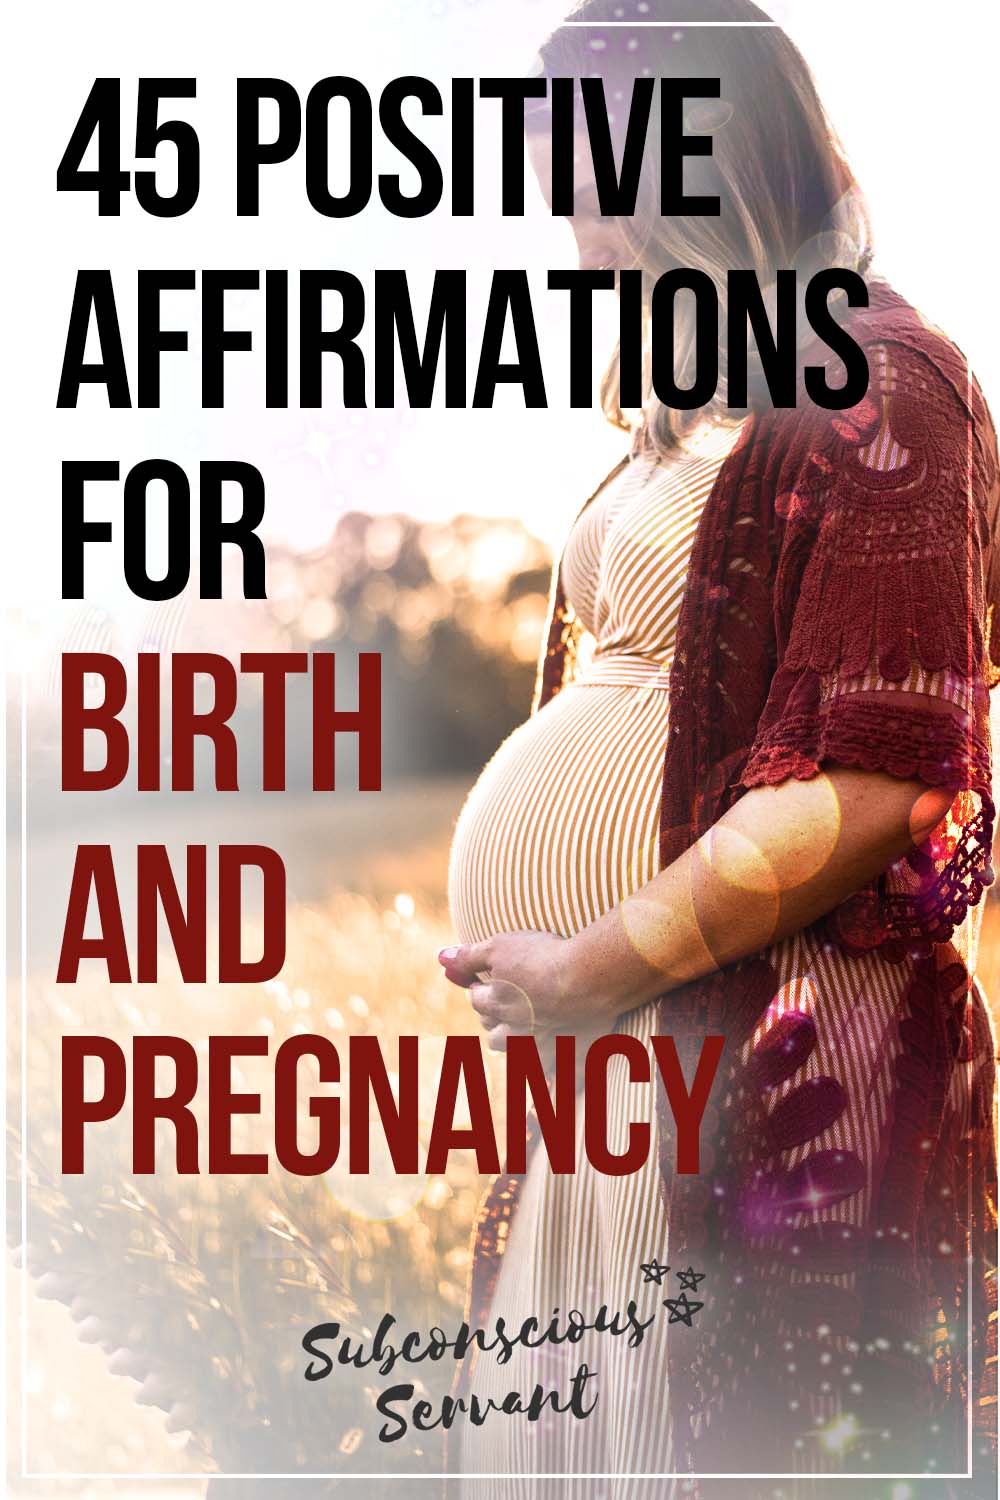 45 Positive Affirmations For Birth And Pregnancy 👶